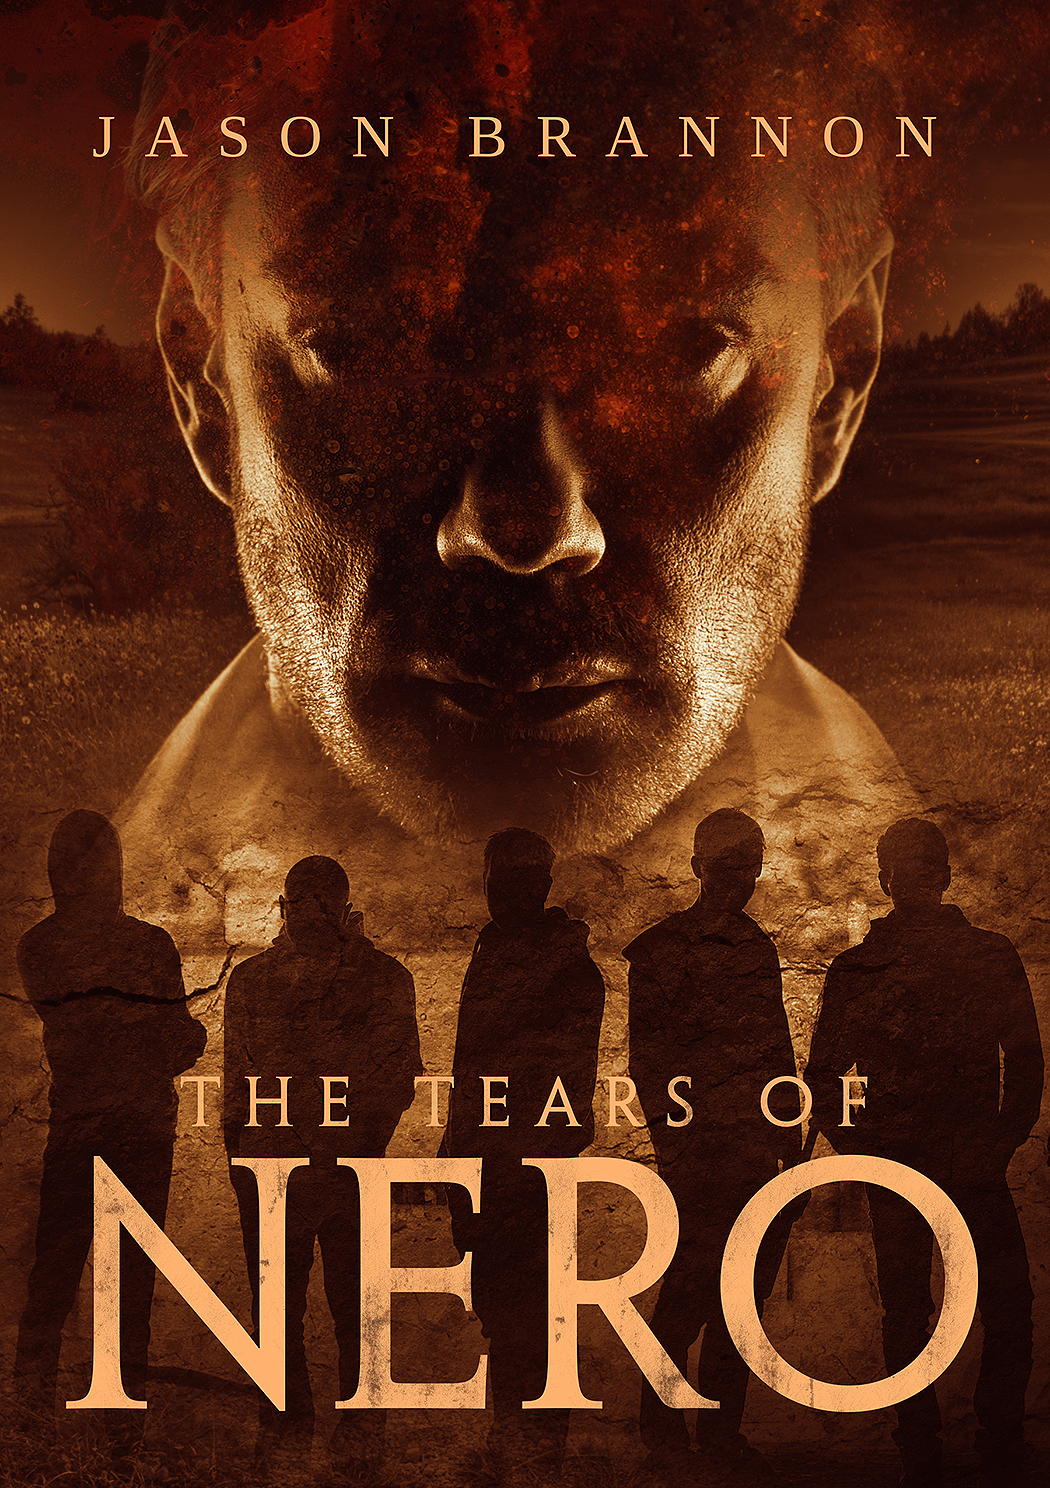 FREE: The Tears of Nero by Jason Brannon